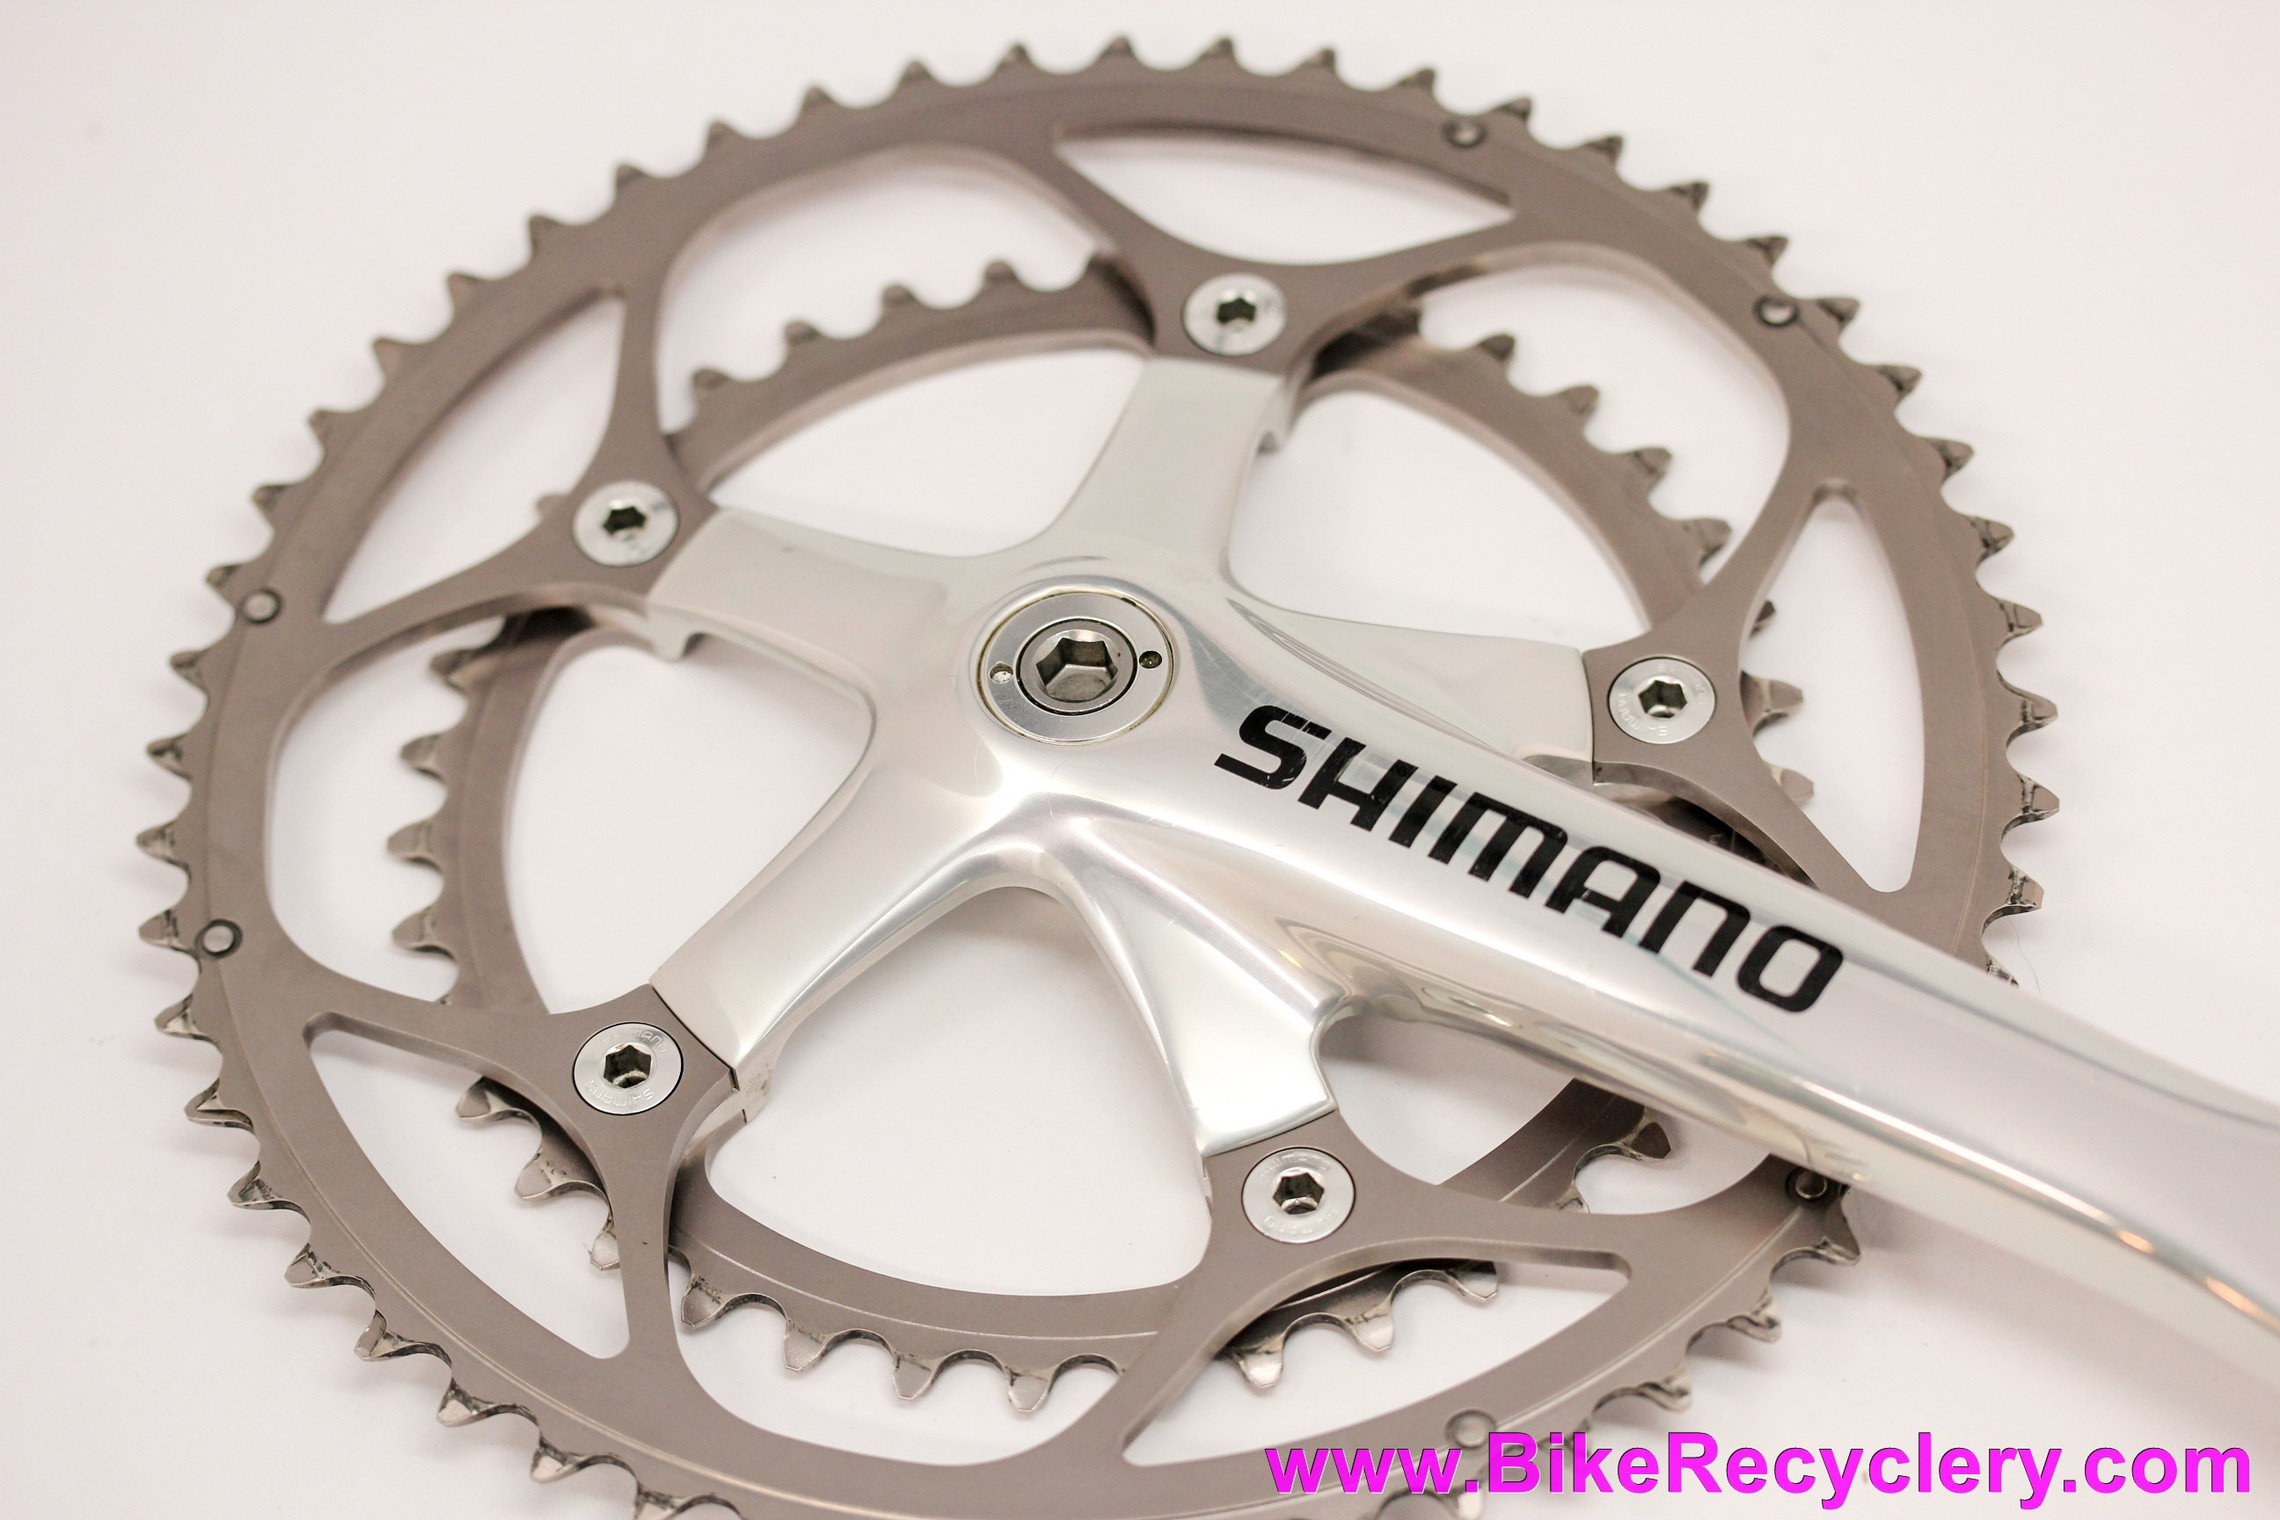 Shimano Dura Ace FC-7701 Team Issue Crankset: 175mm x 53/39t Double (Almost NOS >50 Miles)